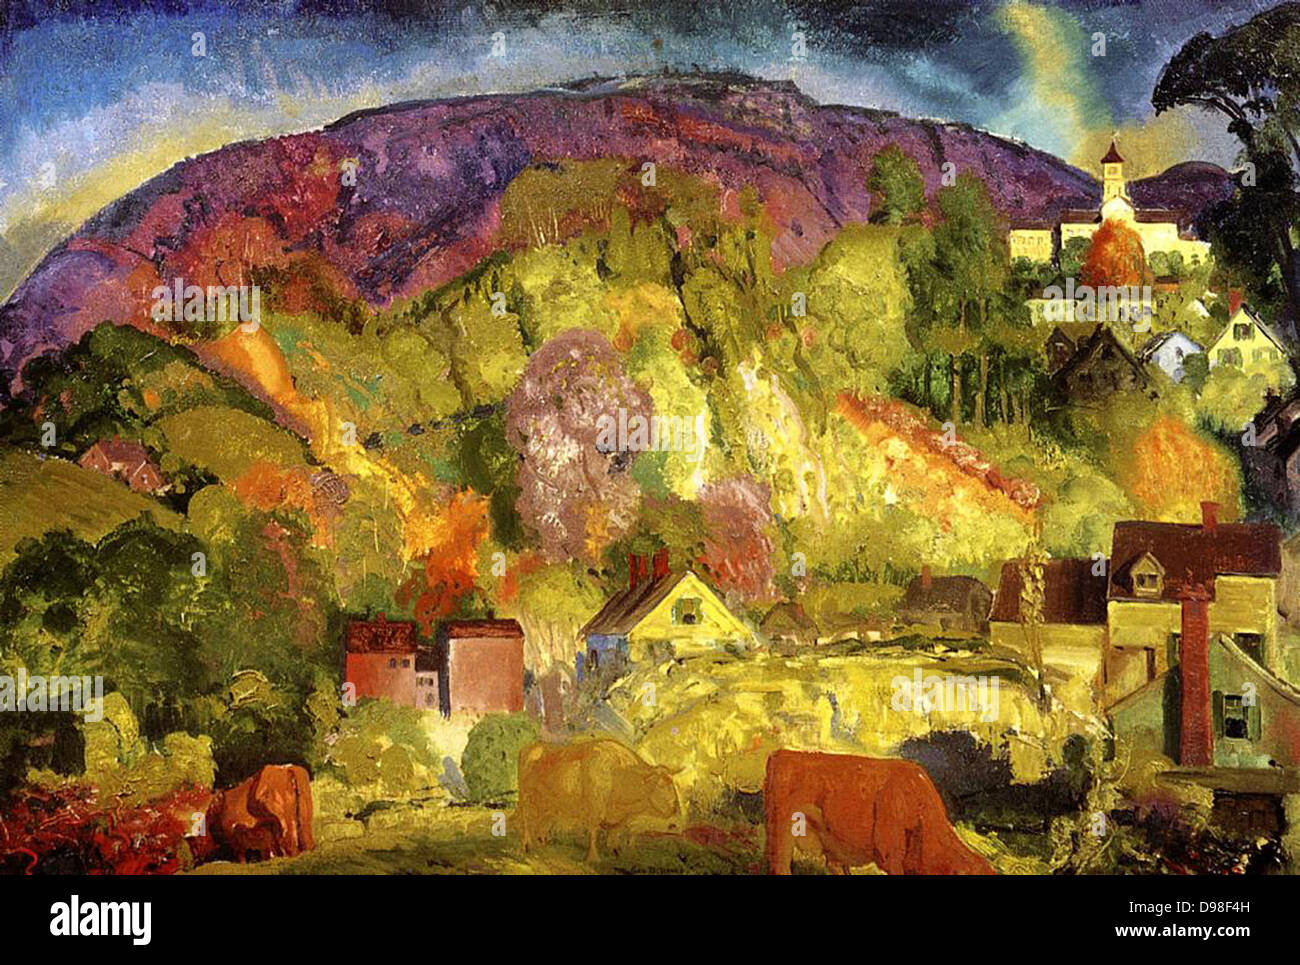 George Wesley Bellows, American (Ashcan School) Painter, 1882-1925. 'The Village on the Hill' 1917 Stock Photo